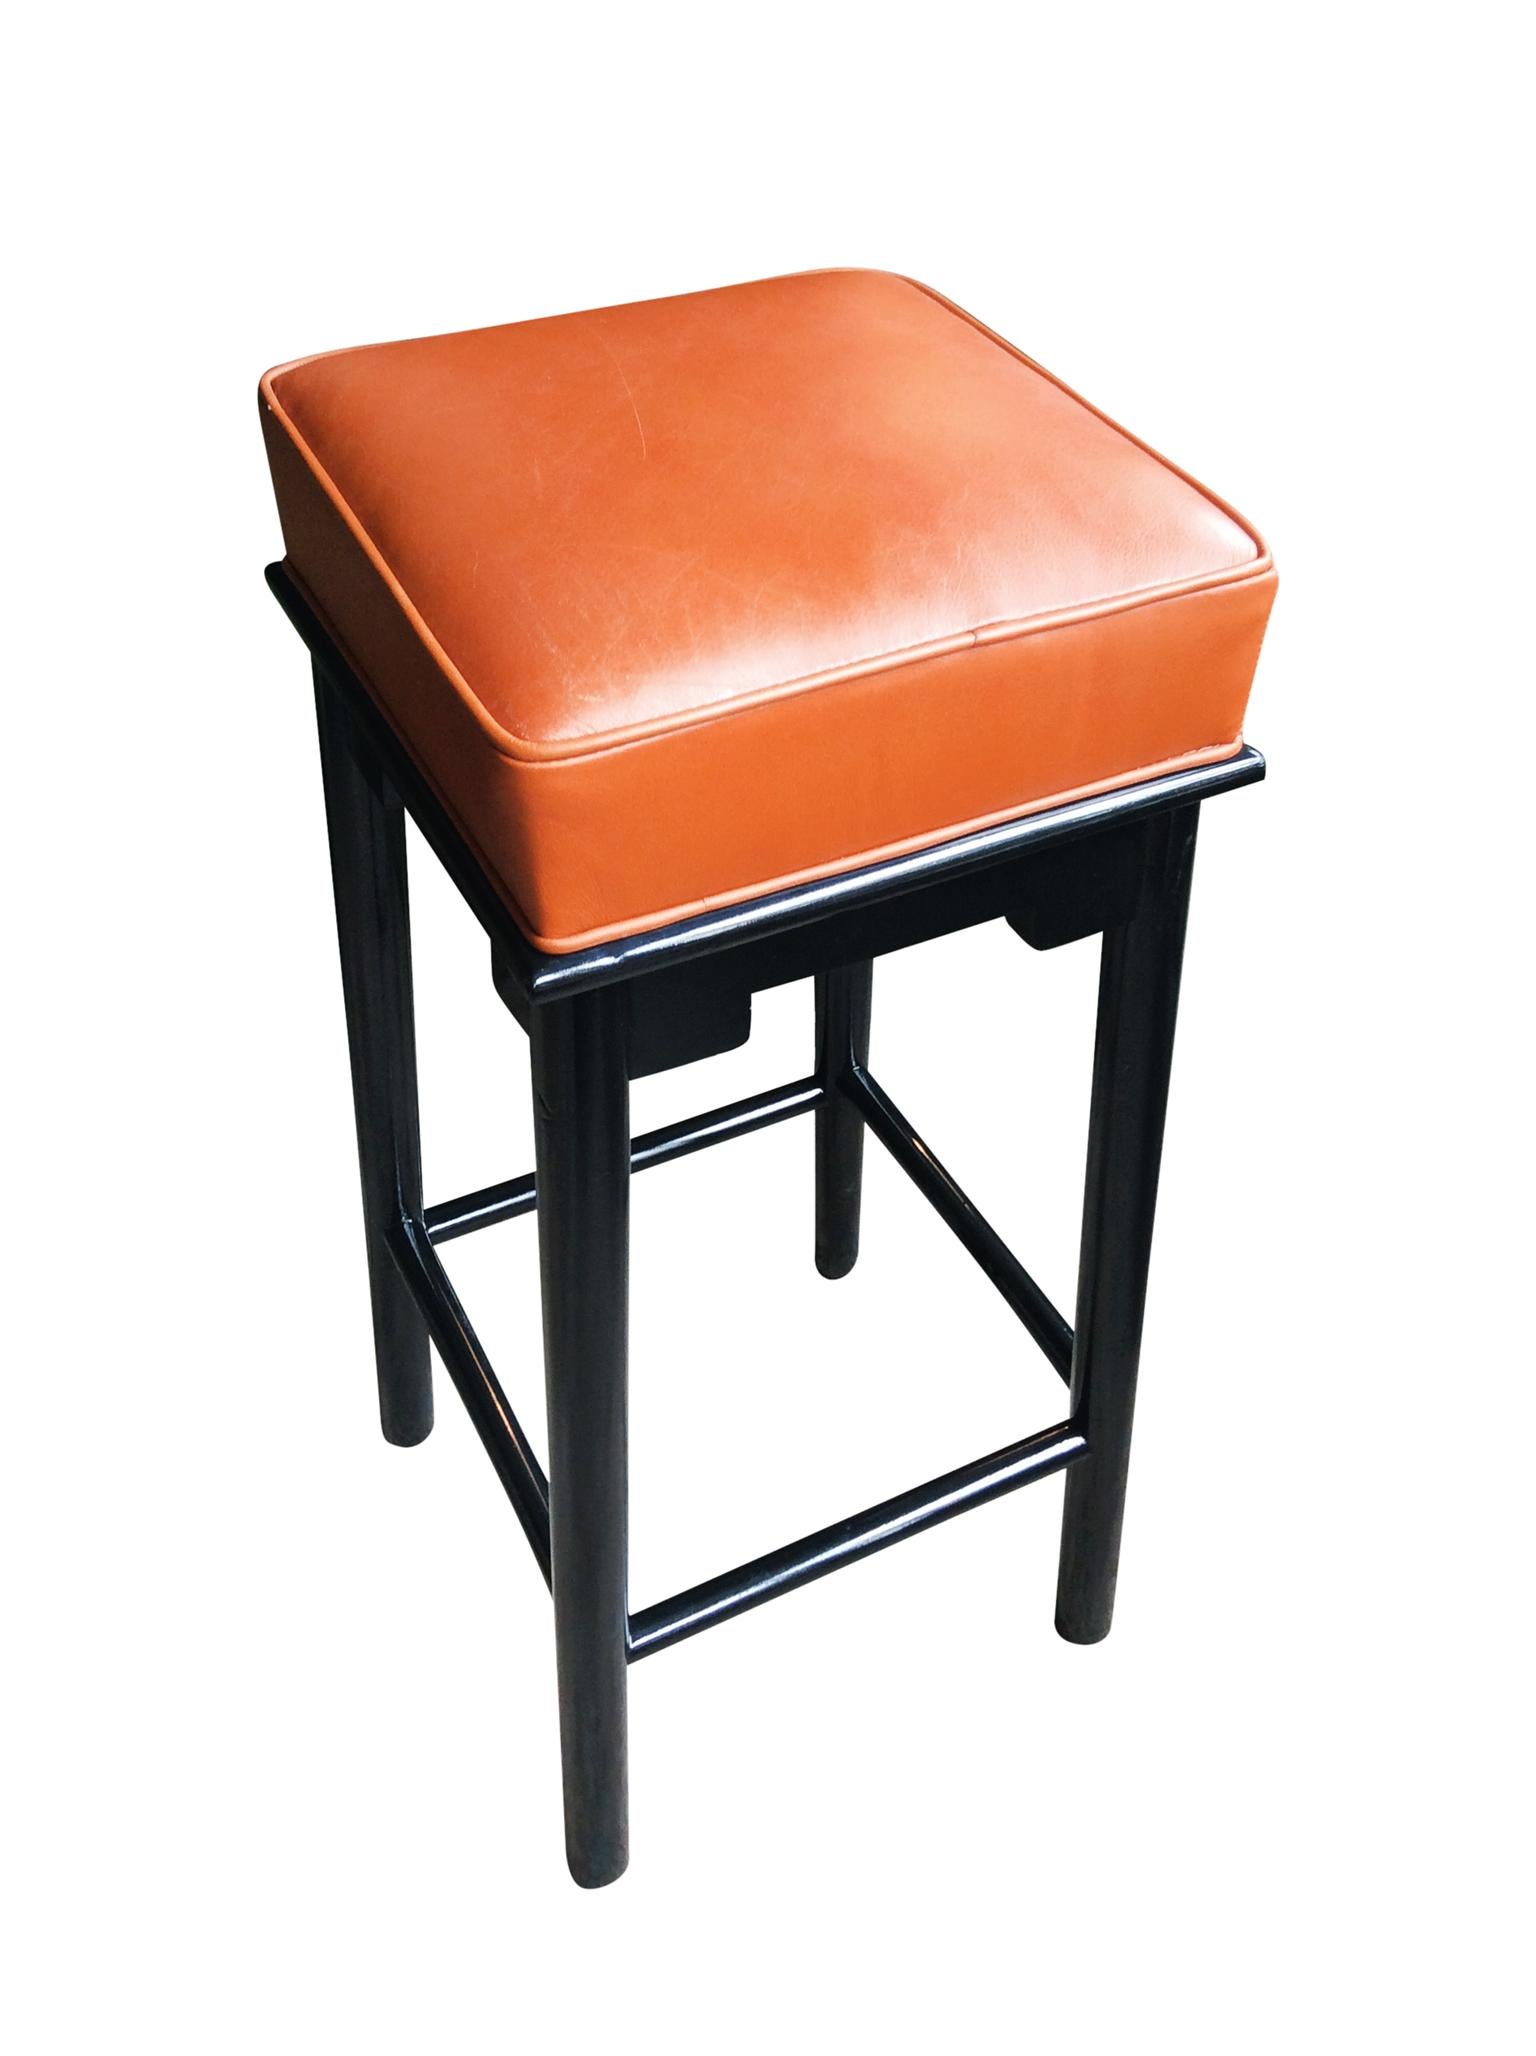 American Pair of 1950s Leather and Lacquered Bar Stools in the Style of James Mont For Sale